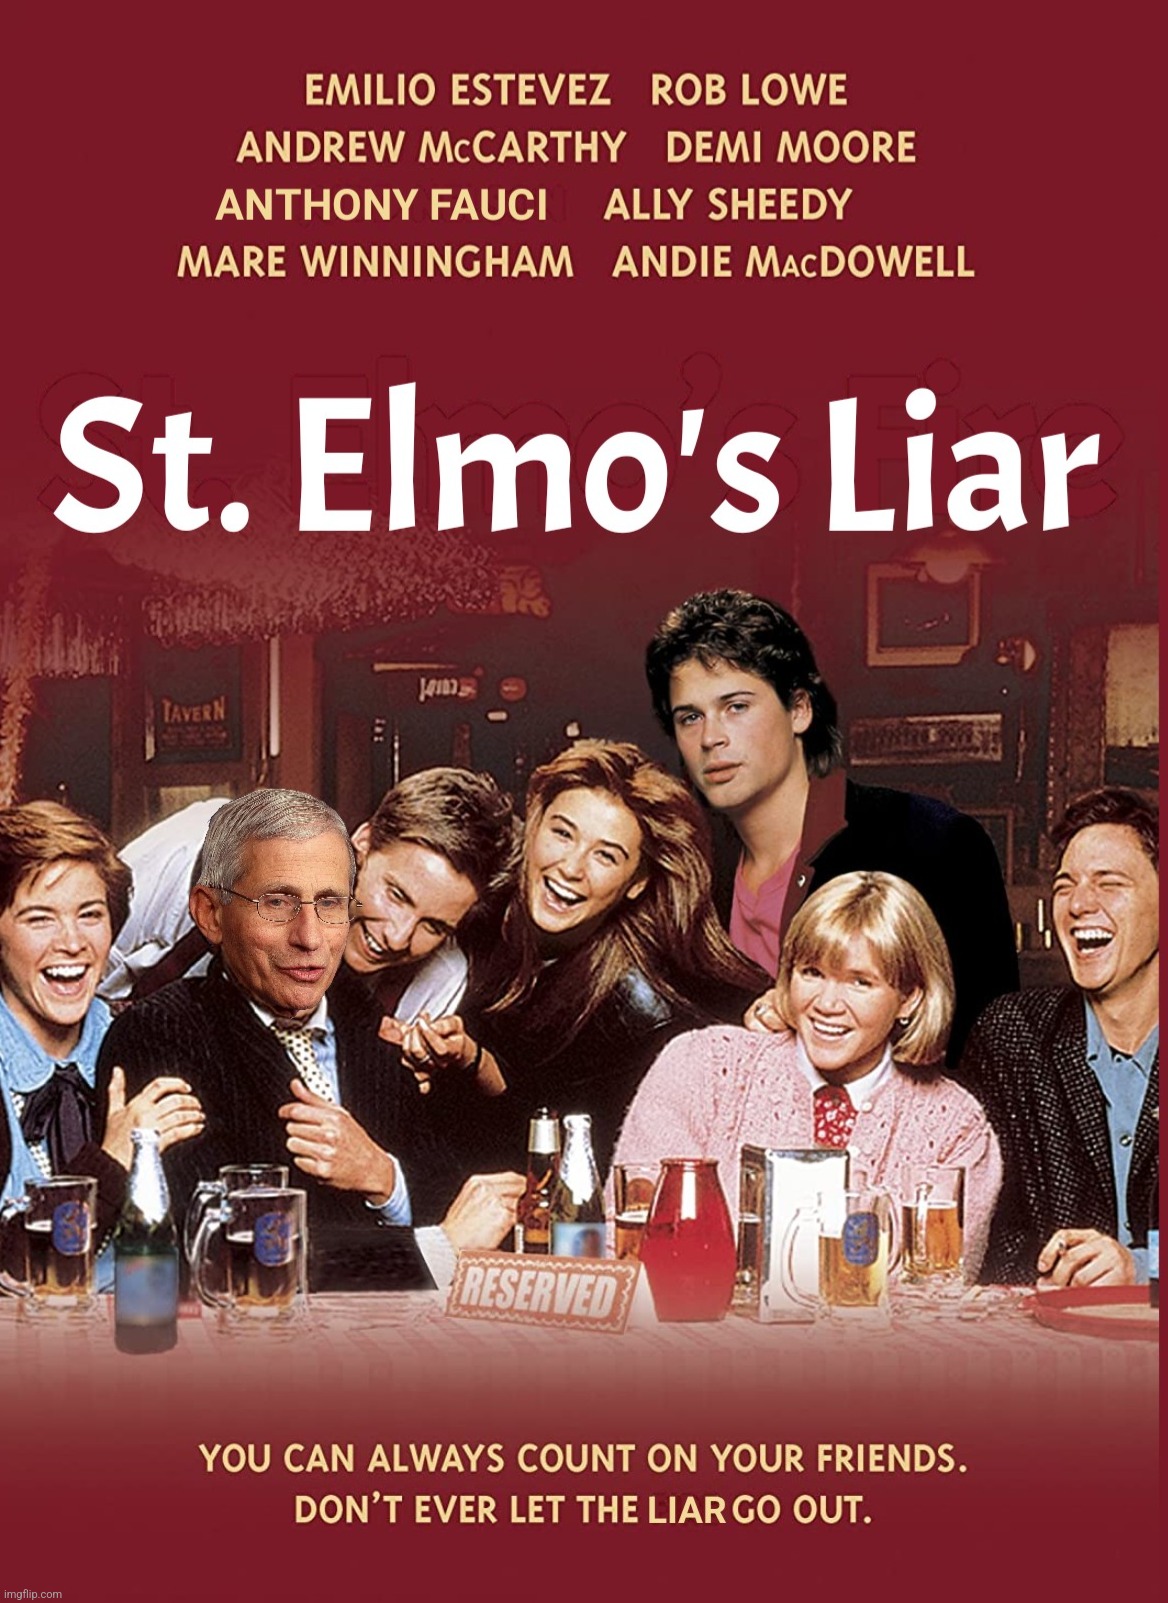 Bad Photoshop Sunday presents:  "Play the game, you know you can't quit until it's won" | image tagged in bad photoshop sunday,anthony fauci,st elmo's fire,st elmo's liar | made w/ Imgflip meme maker